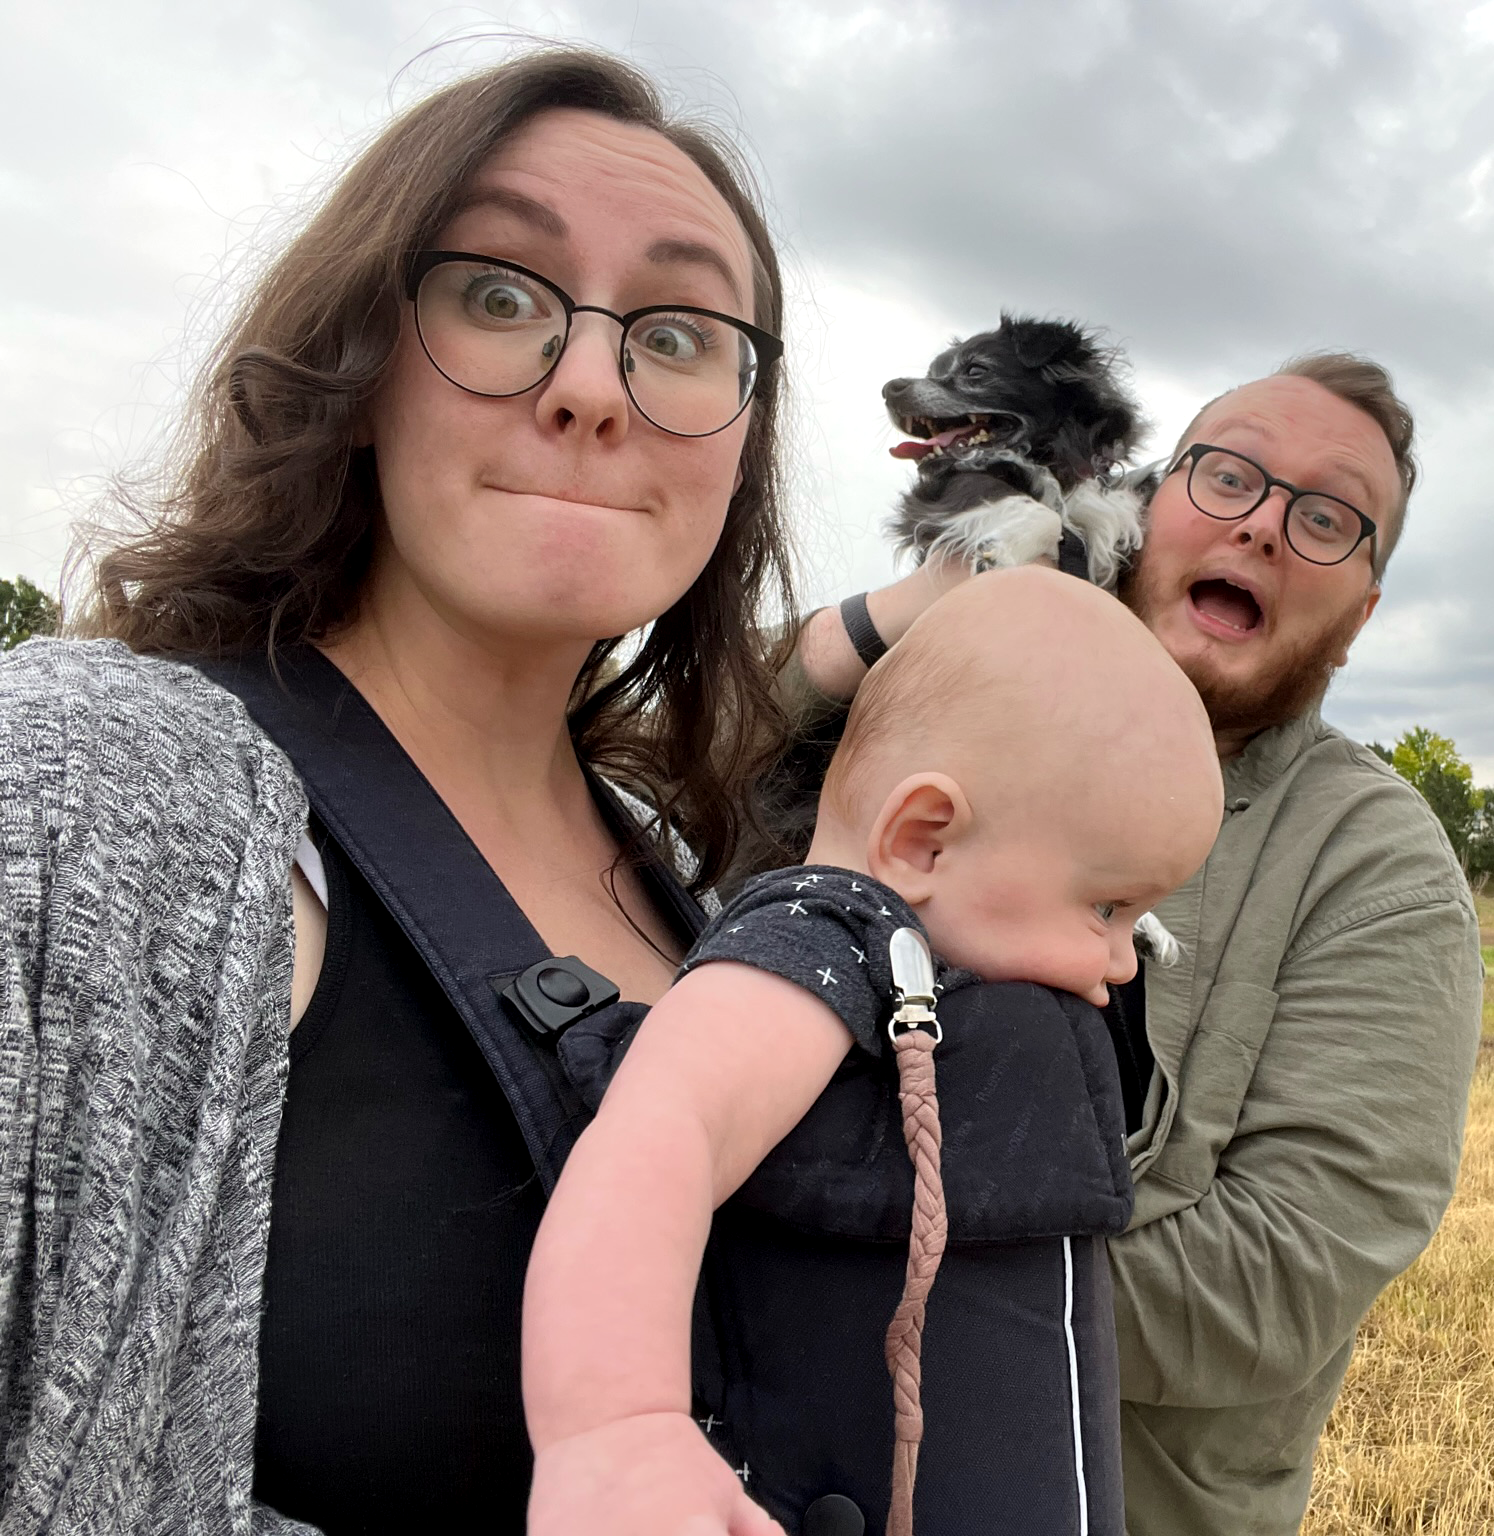 A cute family of my entire family and dog. We're all making funny faces!